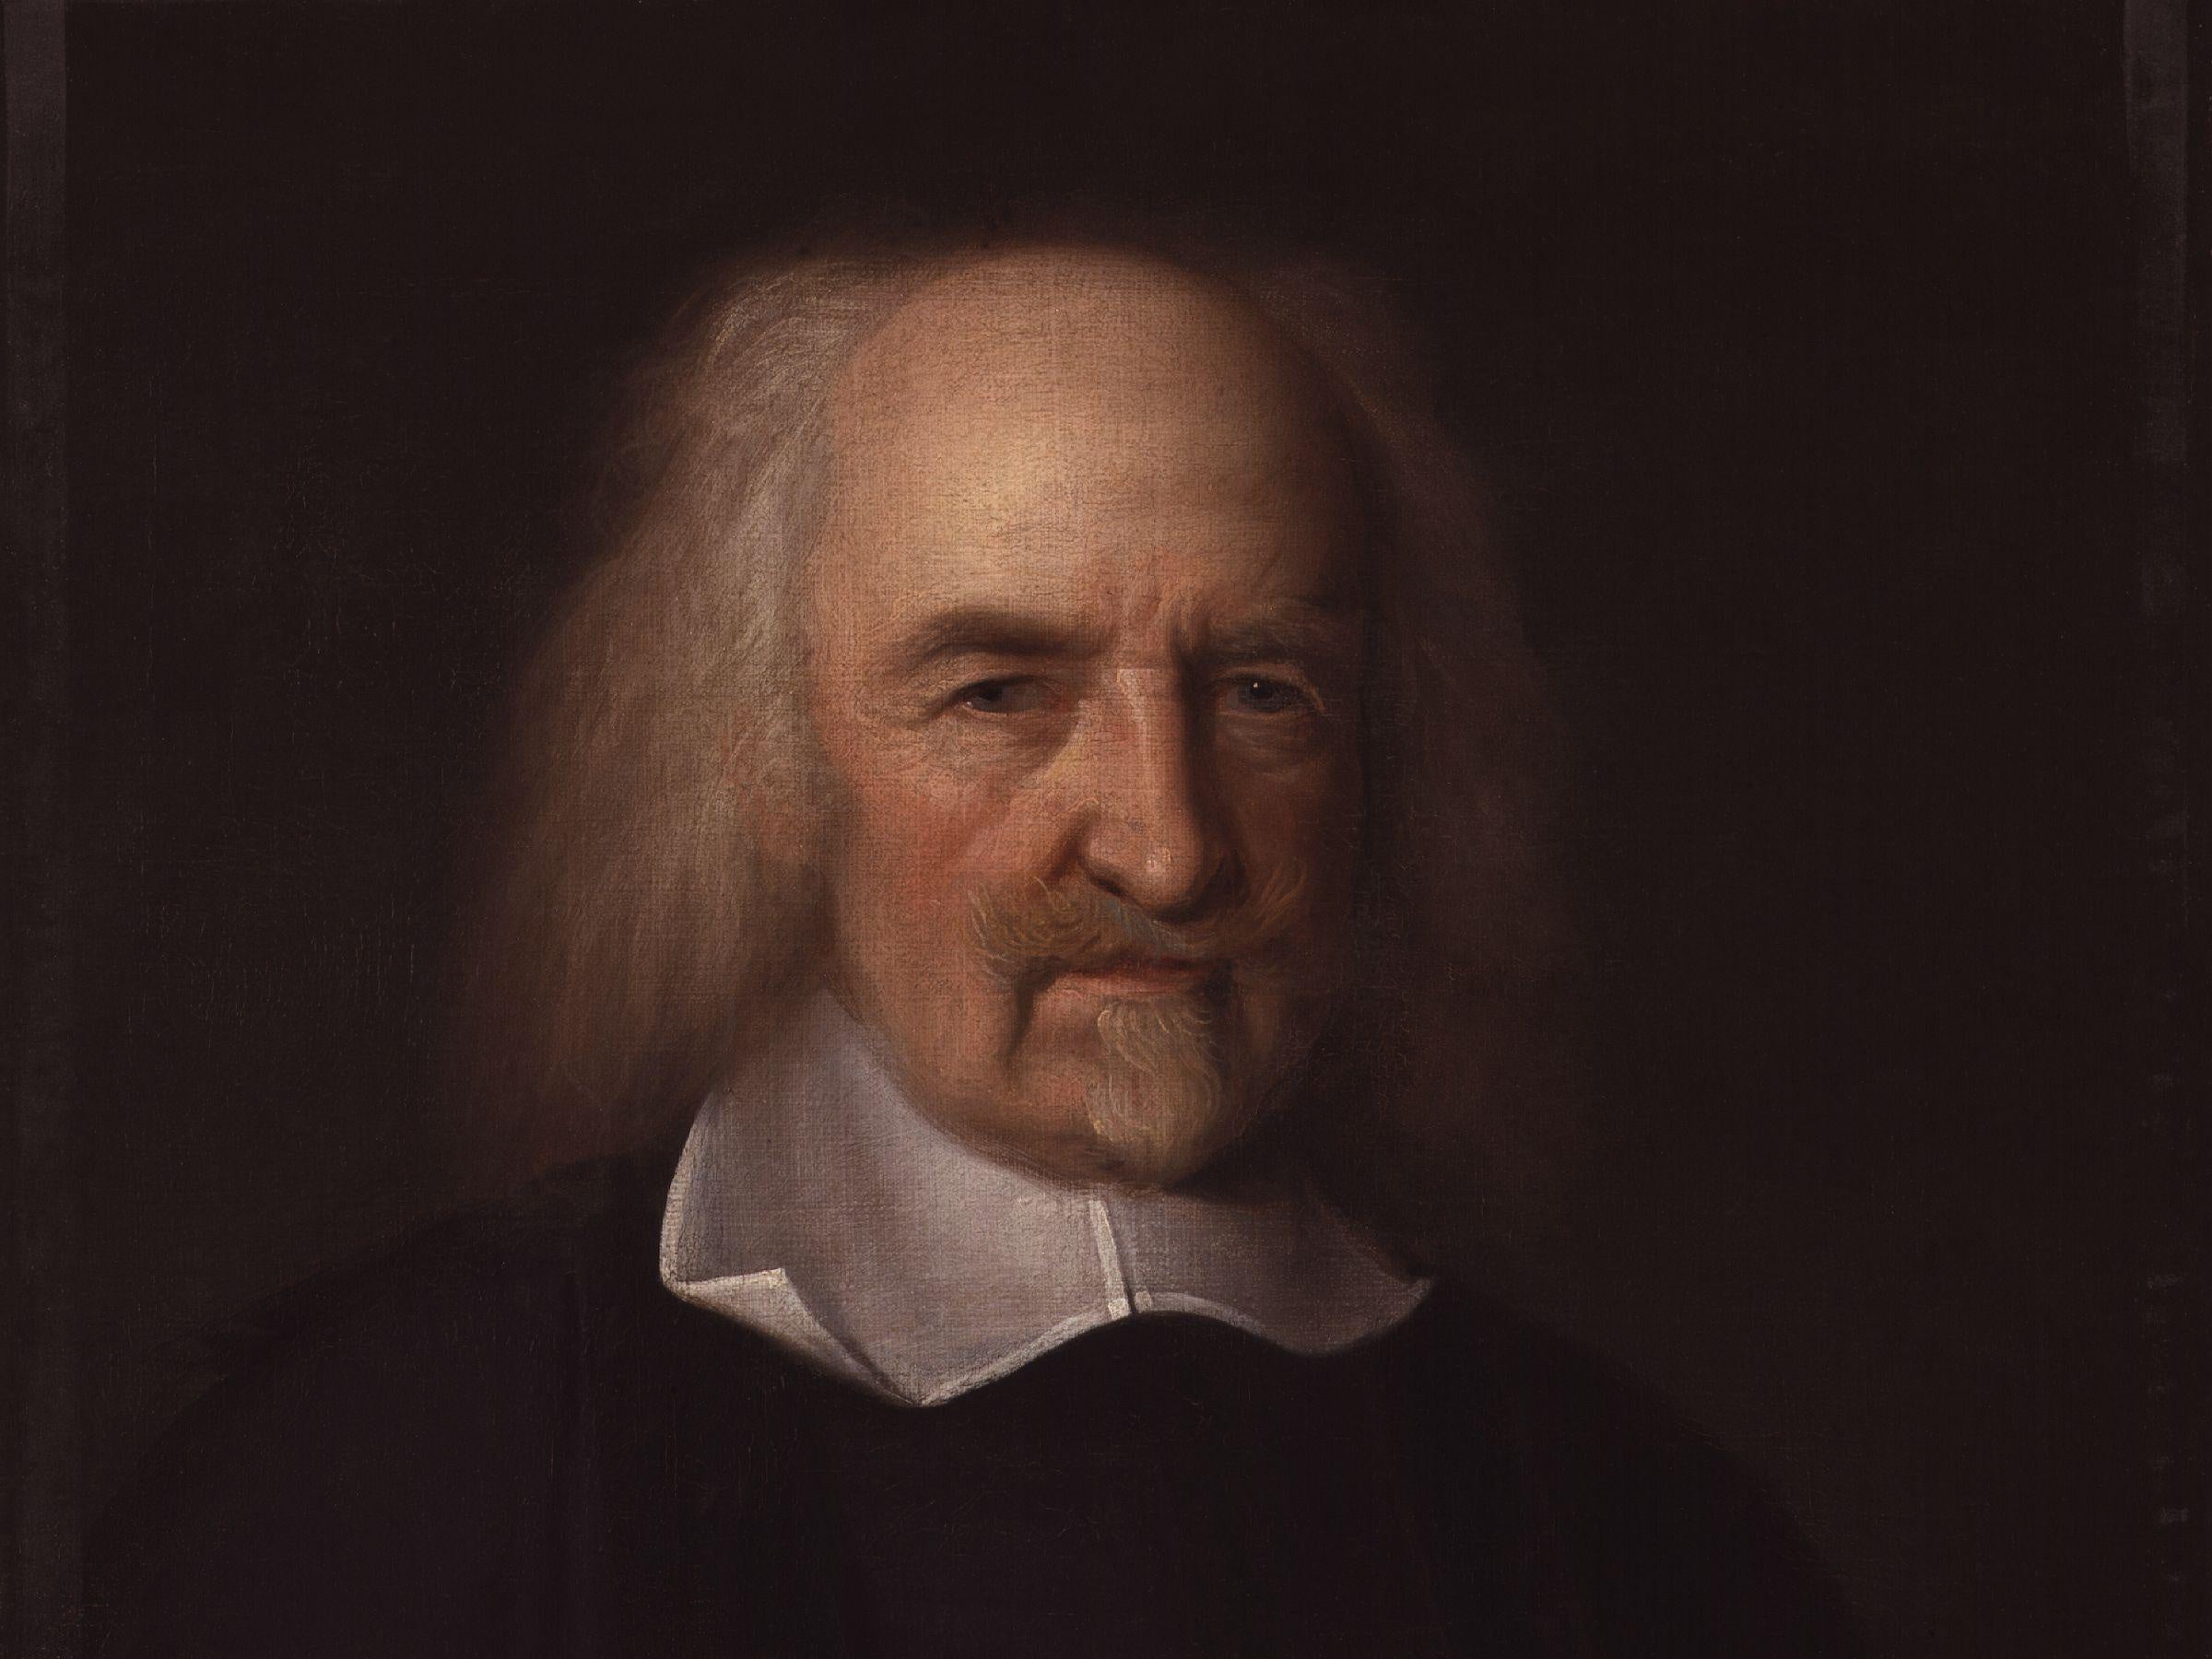 Hobbes has been called, with some justice, the father of modern analytic philosophy, and he certainly ushered in modern political philosophy and social theory as we know it